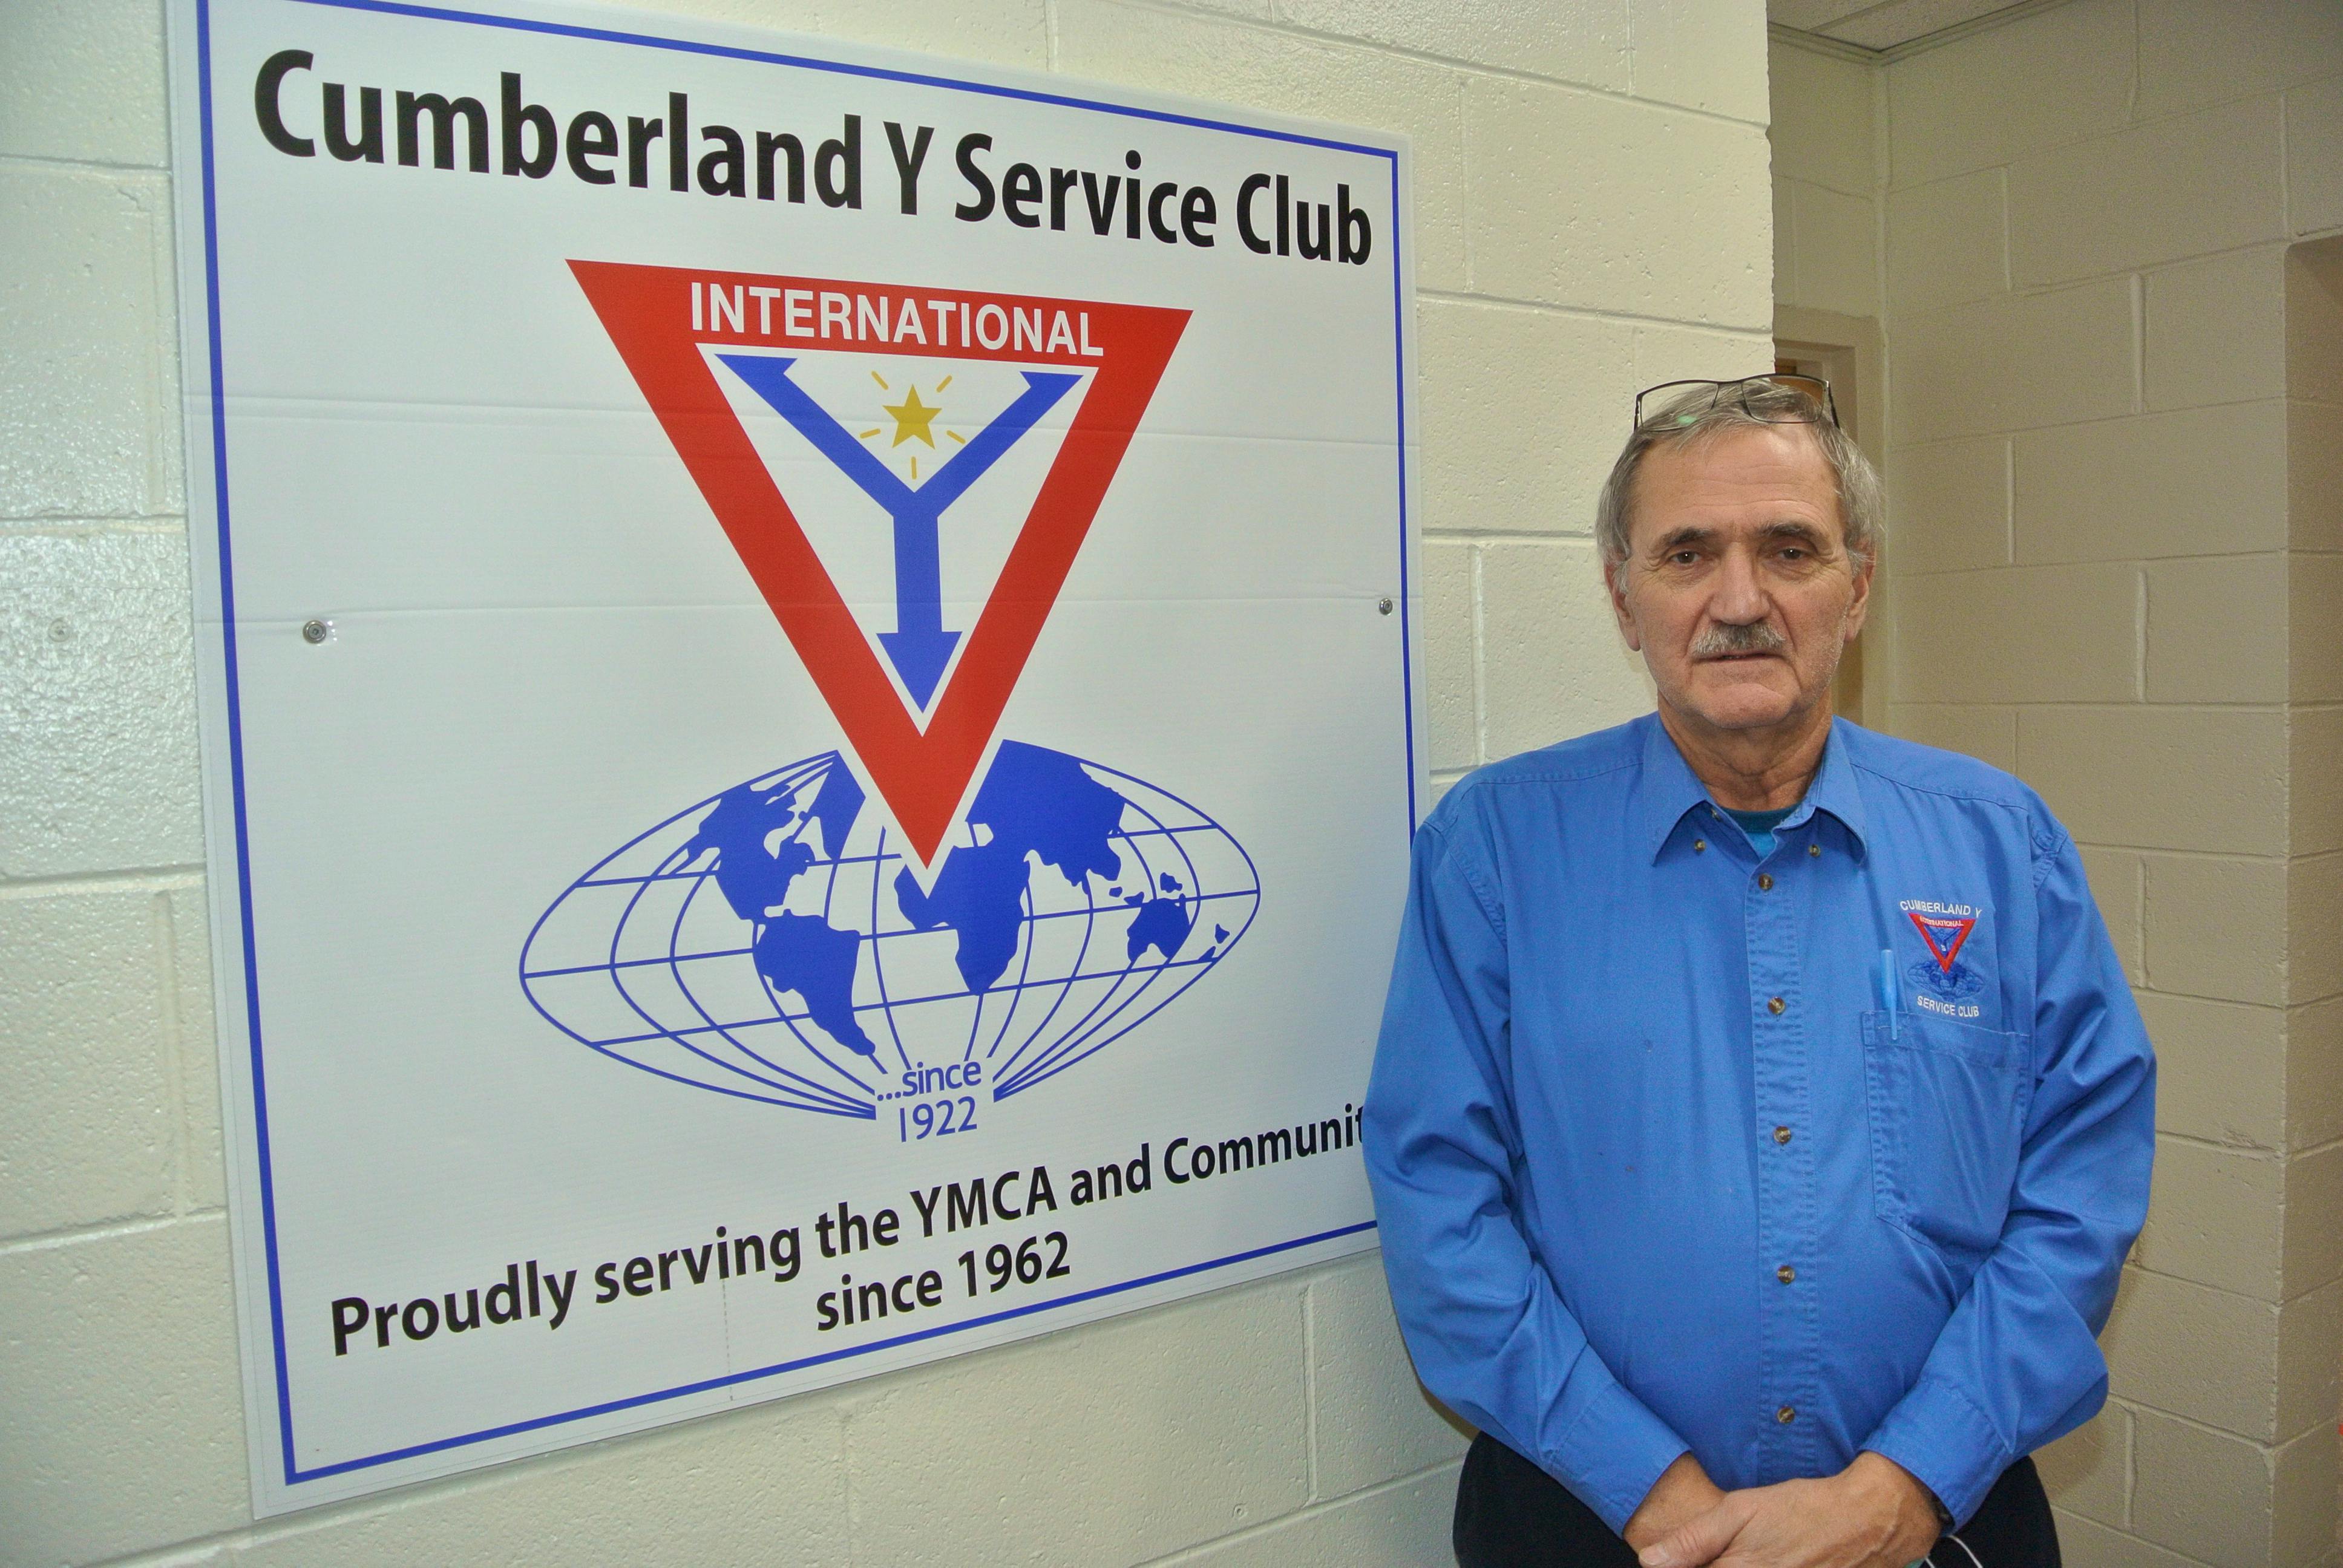 Kent Leslie has been a member of the Cumberland Y Service Club since 1986. He was honoured with a Golden Book Tribute for his work with the club and community in 2016 while last year he was presented the Purdy Cougle Memorial Award as the Maritime Y’s Man of the Year. Darrell Cole - Cumberland Wire